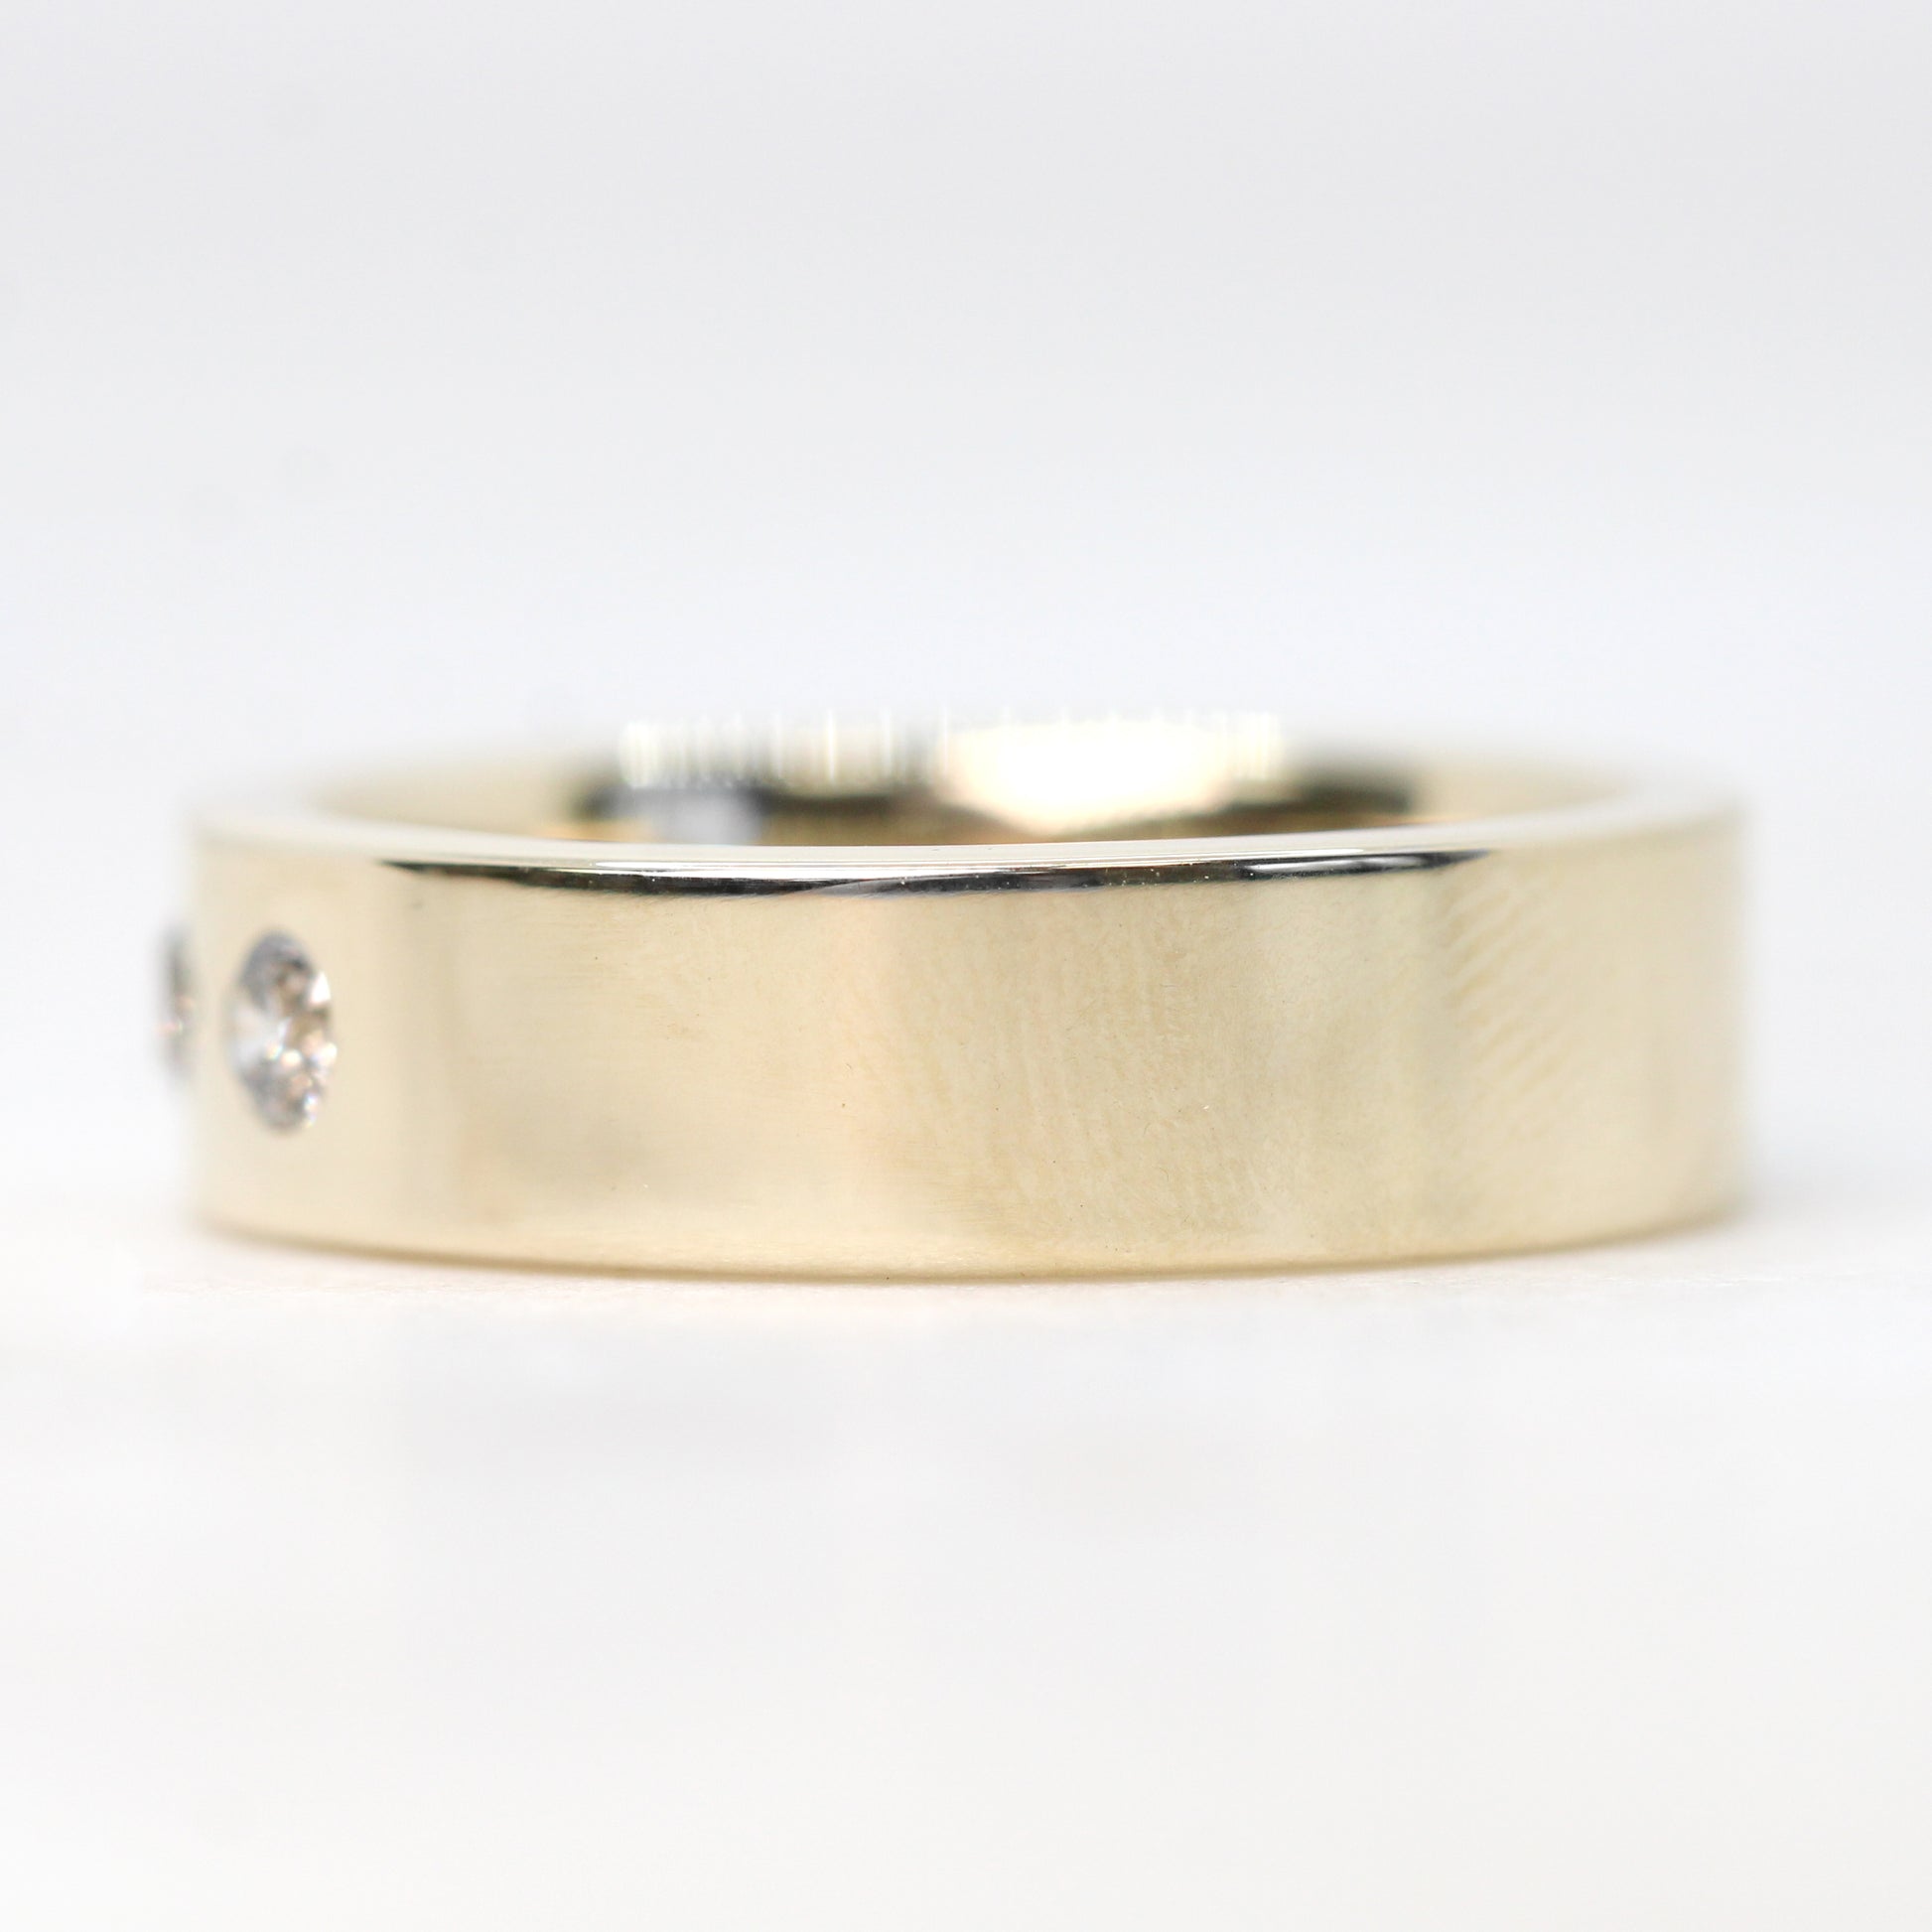 Samantha - Rowan Band - Unisex Wedding Band - Made to Order, Choose Your Gold Tone - Midwinter Co. Alternative Bridal Rings and Modern Fine Jewelry